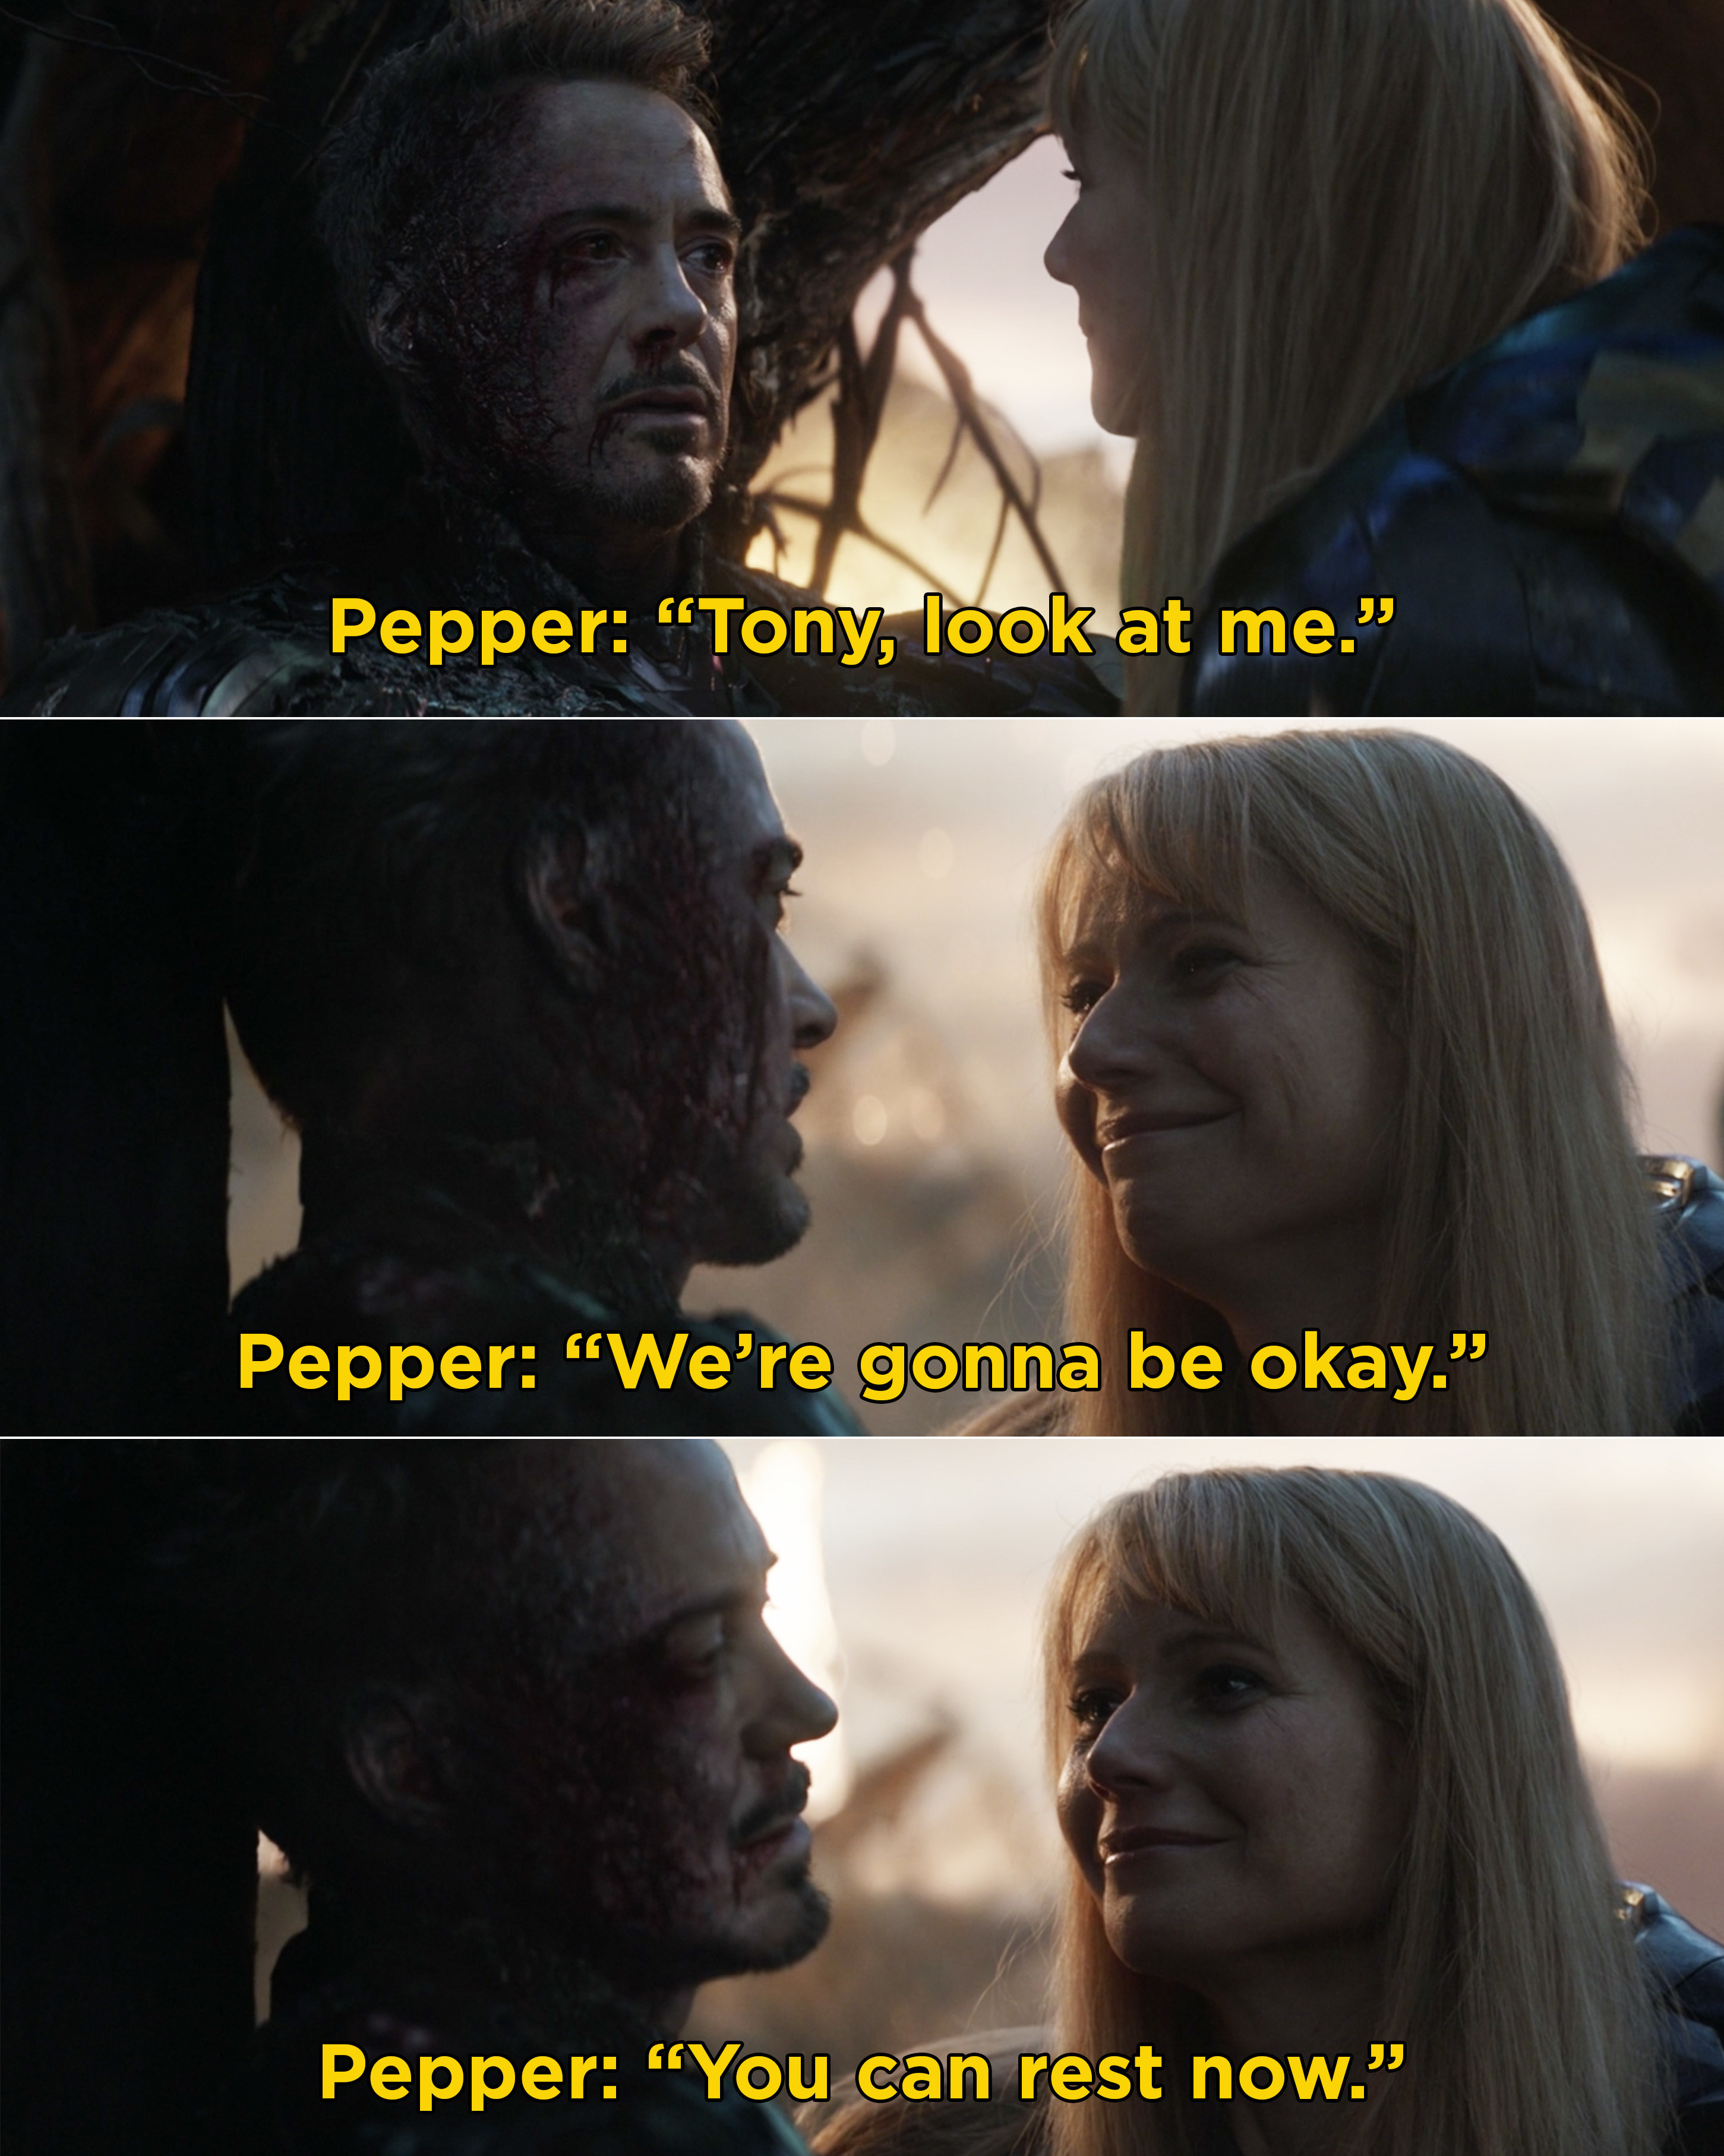 Pepper telling Tony they&#x27;re going to be okay and he can rest now